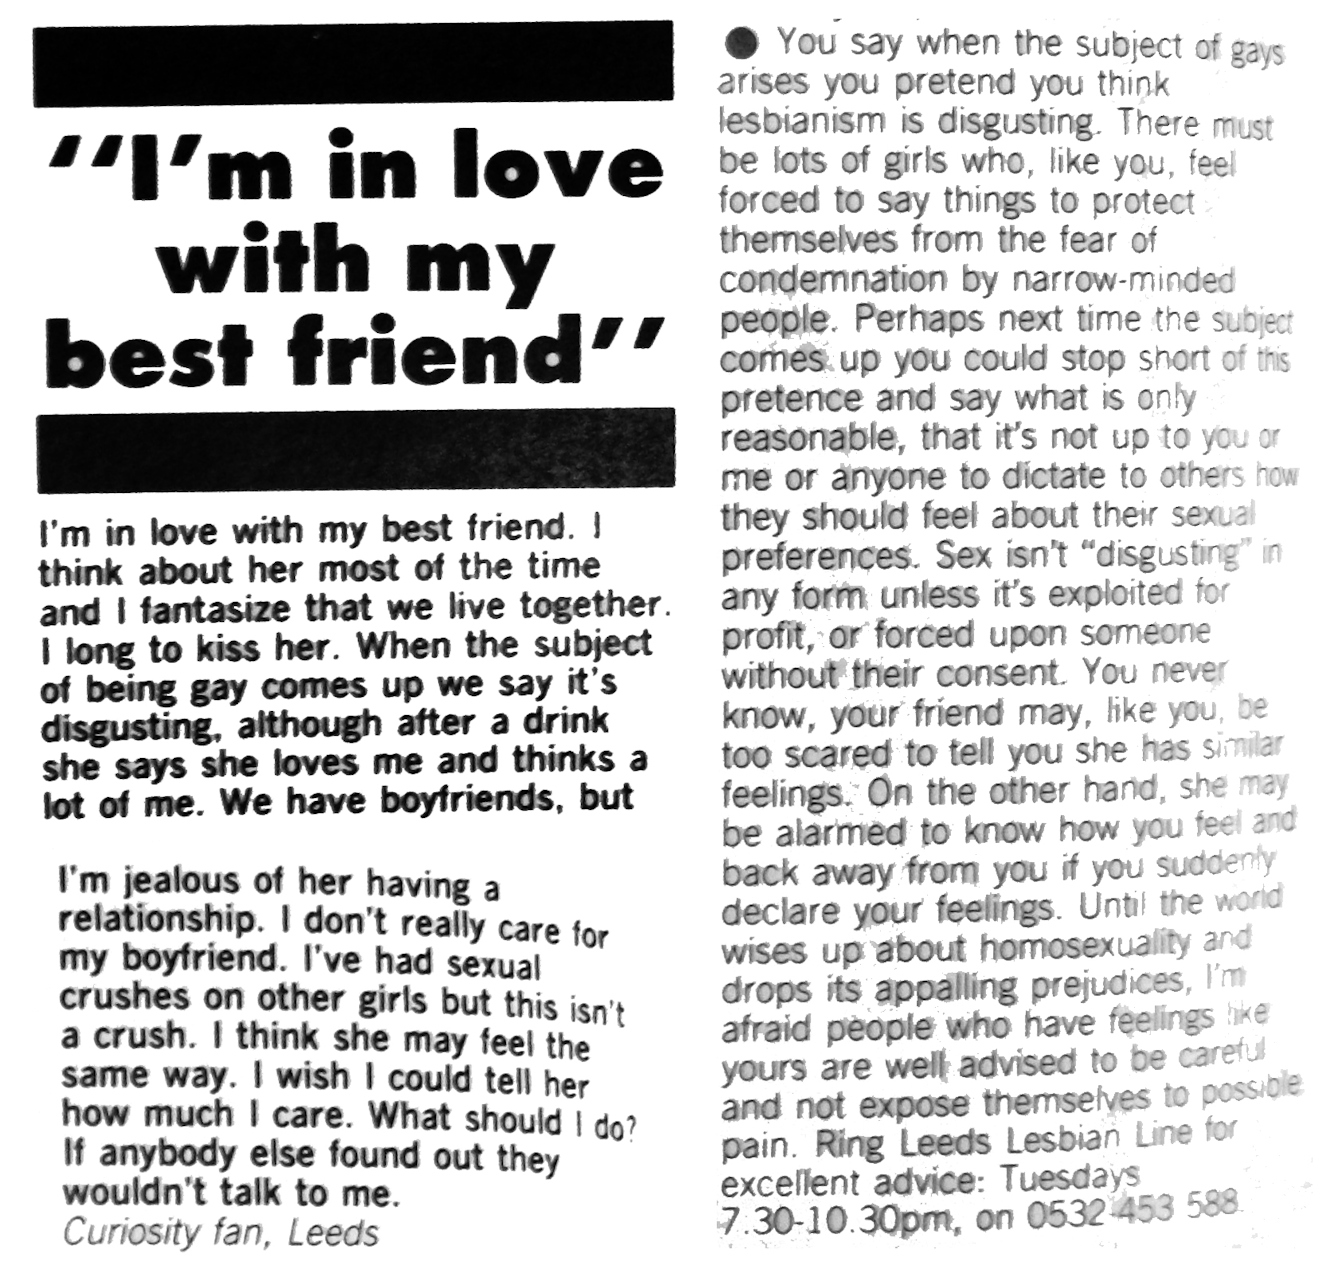 An image of a problem page in which "Curiosity fan, Leeds" explains that she's in love with her best friend and jealous of her friend's boyfriend, and the advice columnist says that 'sex isn't "disgusting" in any form unless it's exploited'.